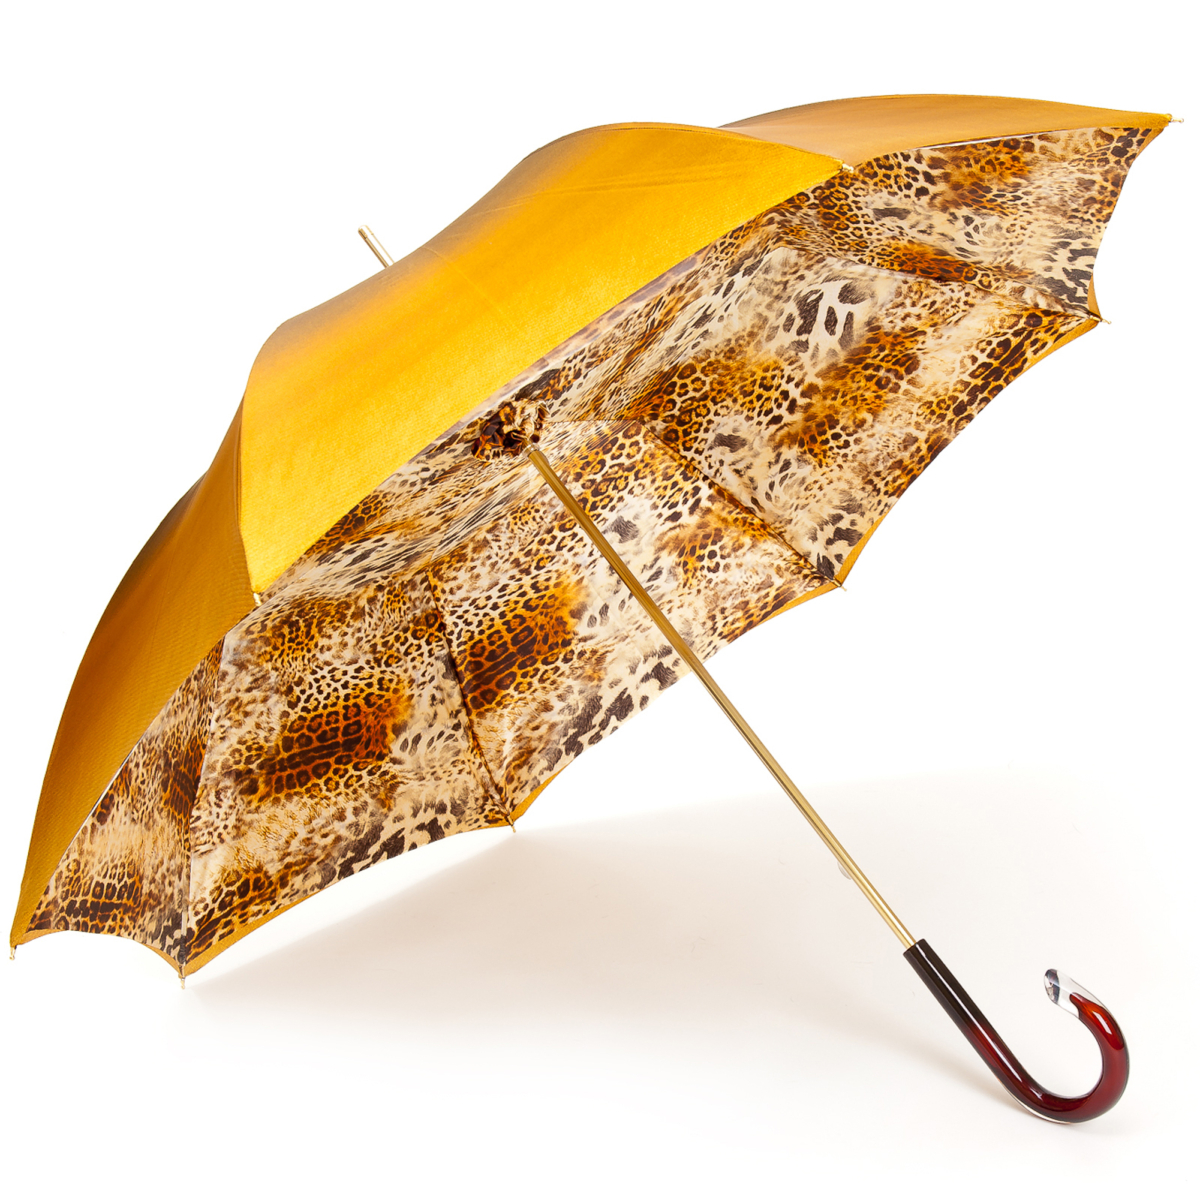 Glamour Gold Luxury Double Canopy Umbrella by Pasotti